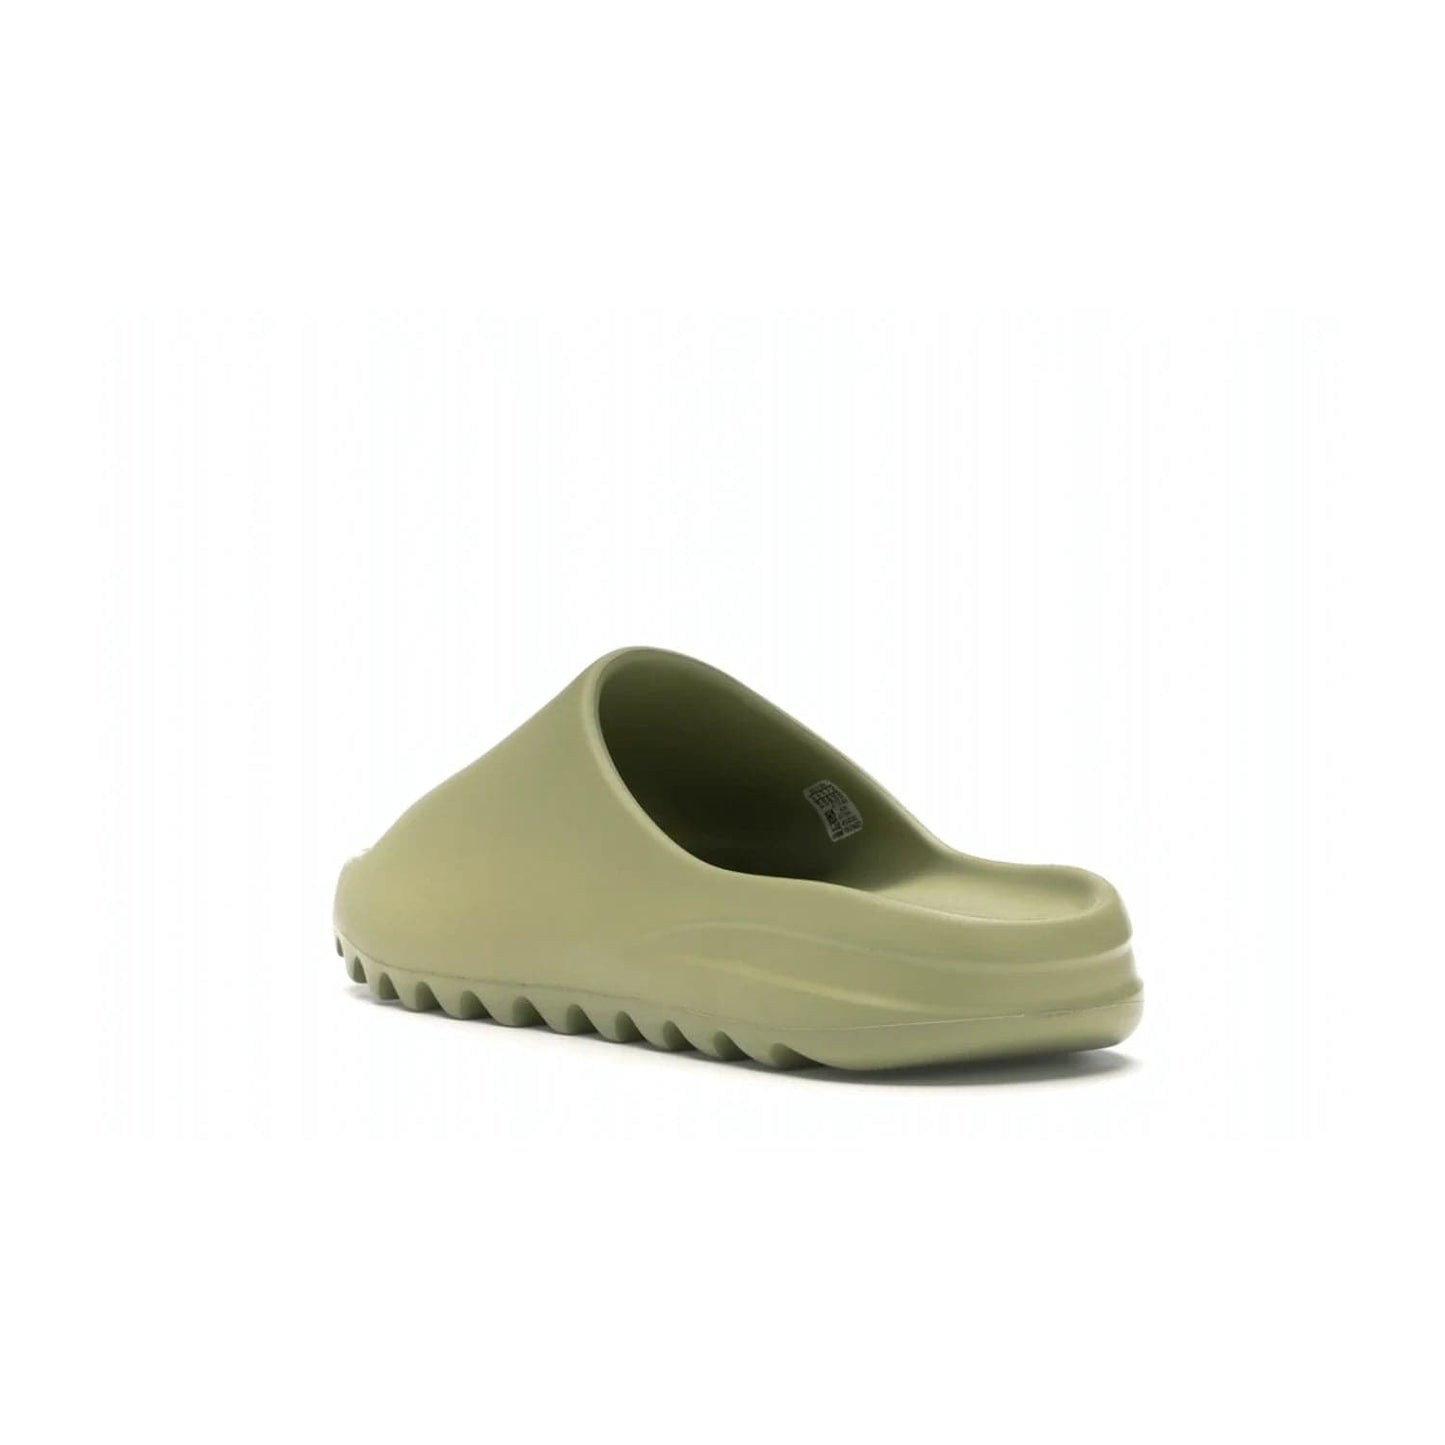 adidas Yeezy Slide Resin (2019/2021) - Image 25 - Only at www.BallersClubKickz.com - Step into fashion and function with the adidas Yeezy Slide Resin. Featuring a lightweight Resin EVA foam construction and an outsole with accentuated grooves for traction and support. The latest release is available in a Resin/Resin/Resin colorway, combining modern aesthetics and classic style. Step into style with the adidas Yeezy Slide Resin and be the trend-setter this season.